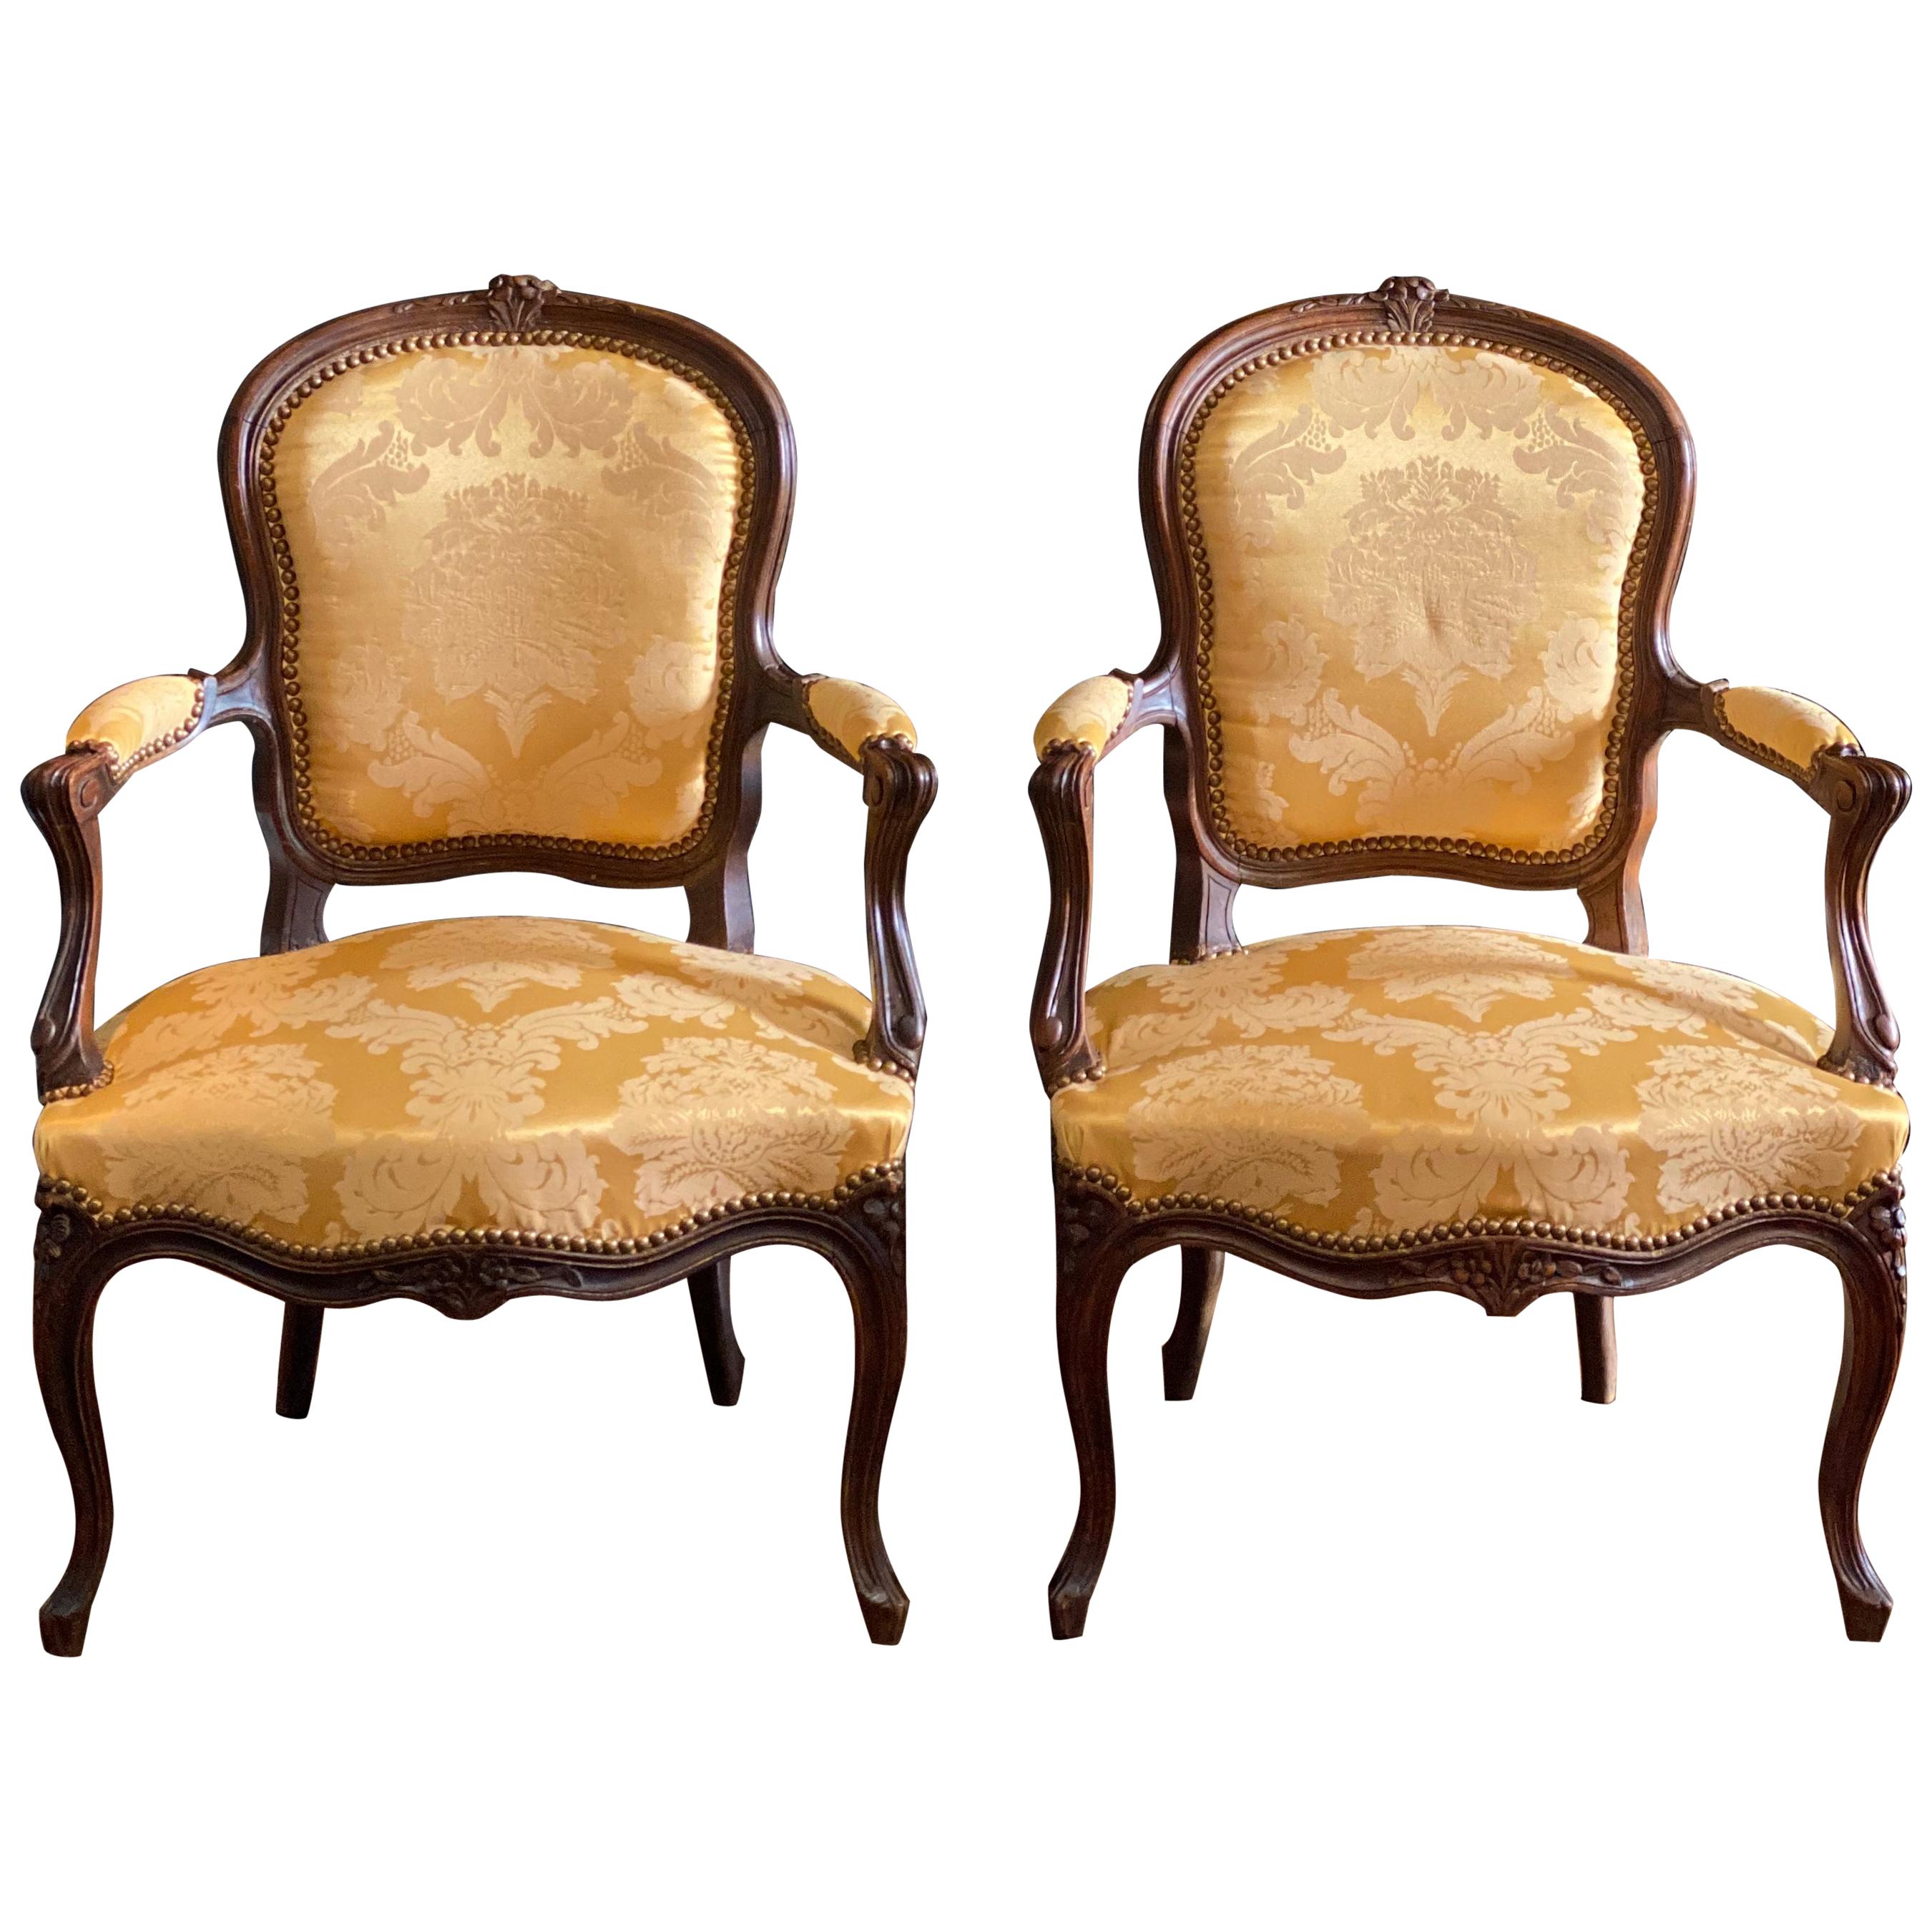 Pair of Mid-19th Century French Carved Fauteuils Louis XVI Armchairs